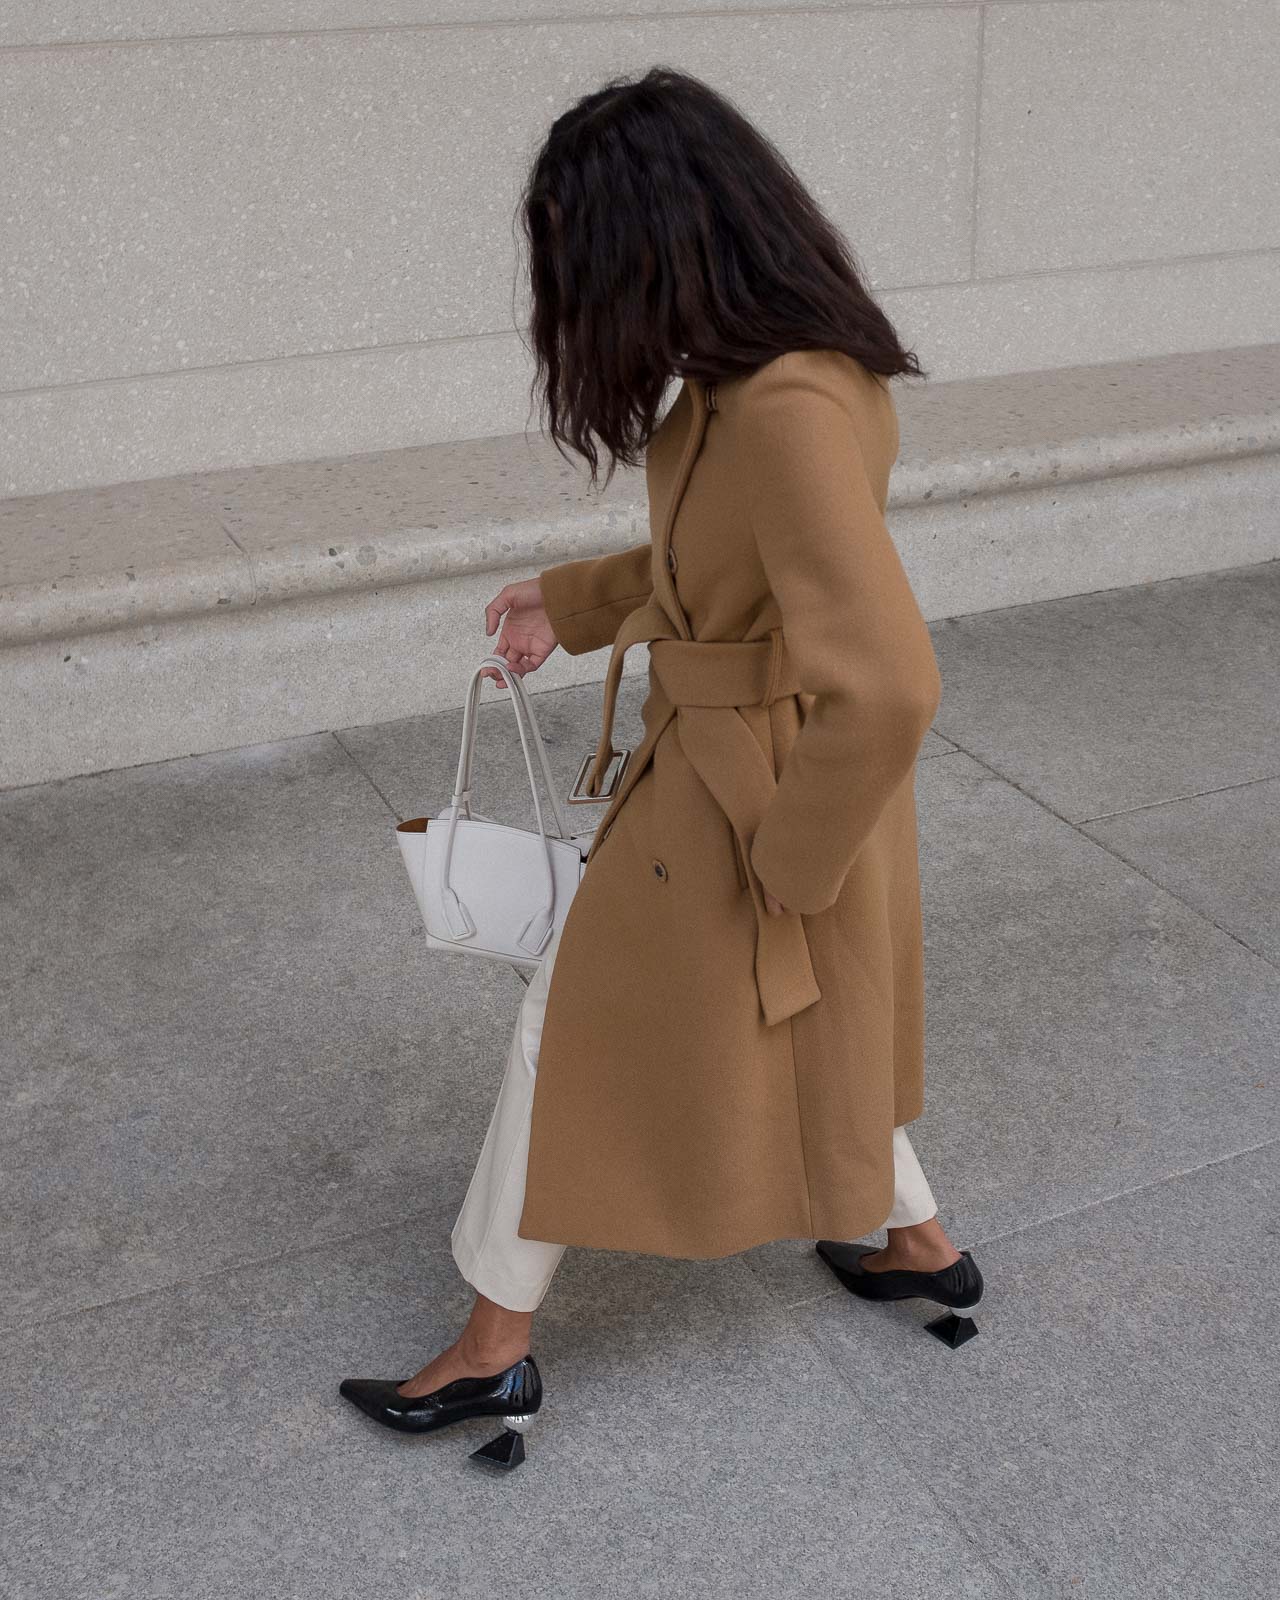 storm wears black mules from yuul yie combined with by malene birger camel coat and white arco bottega veneta bag